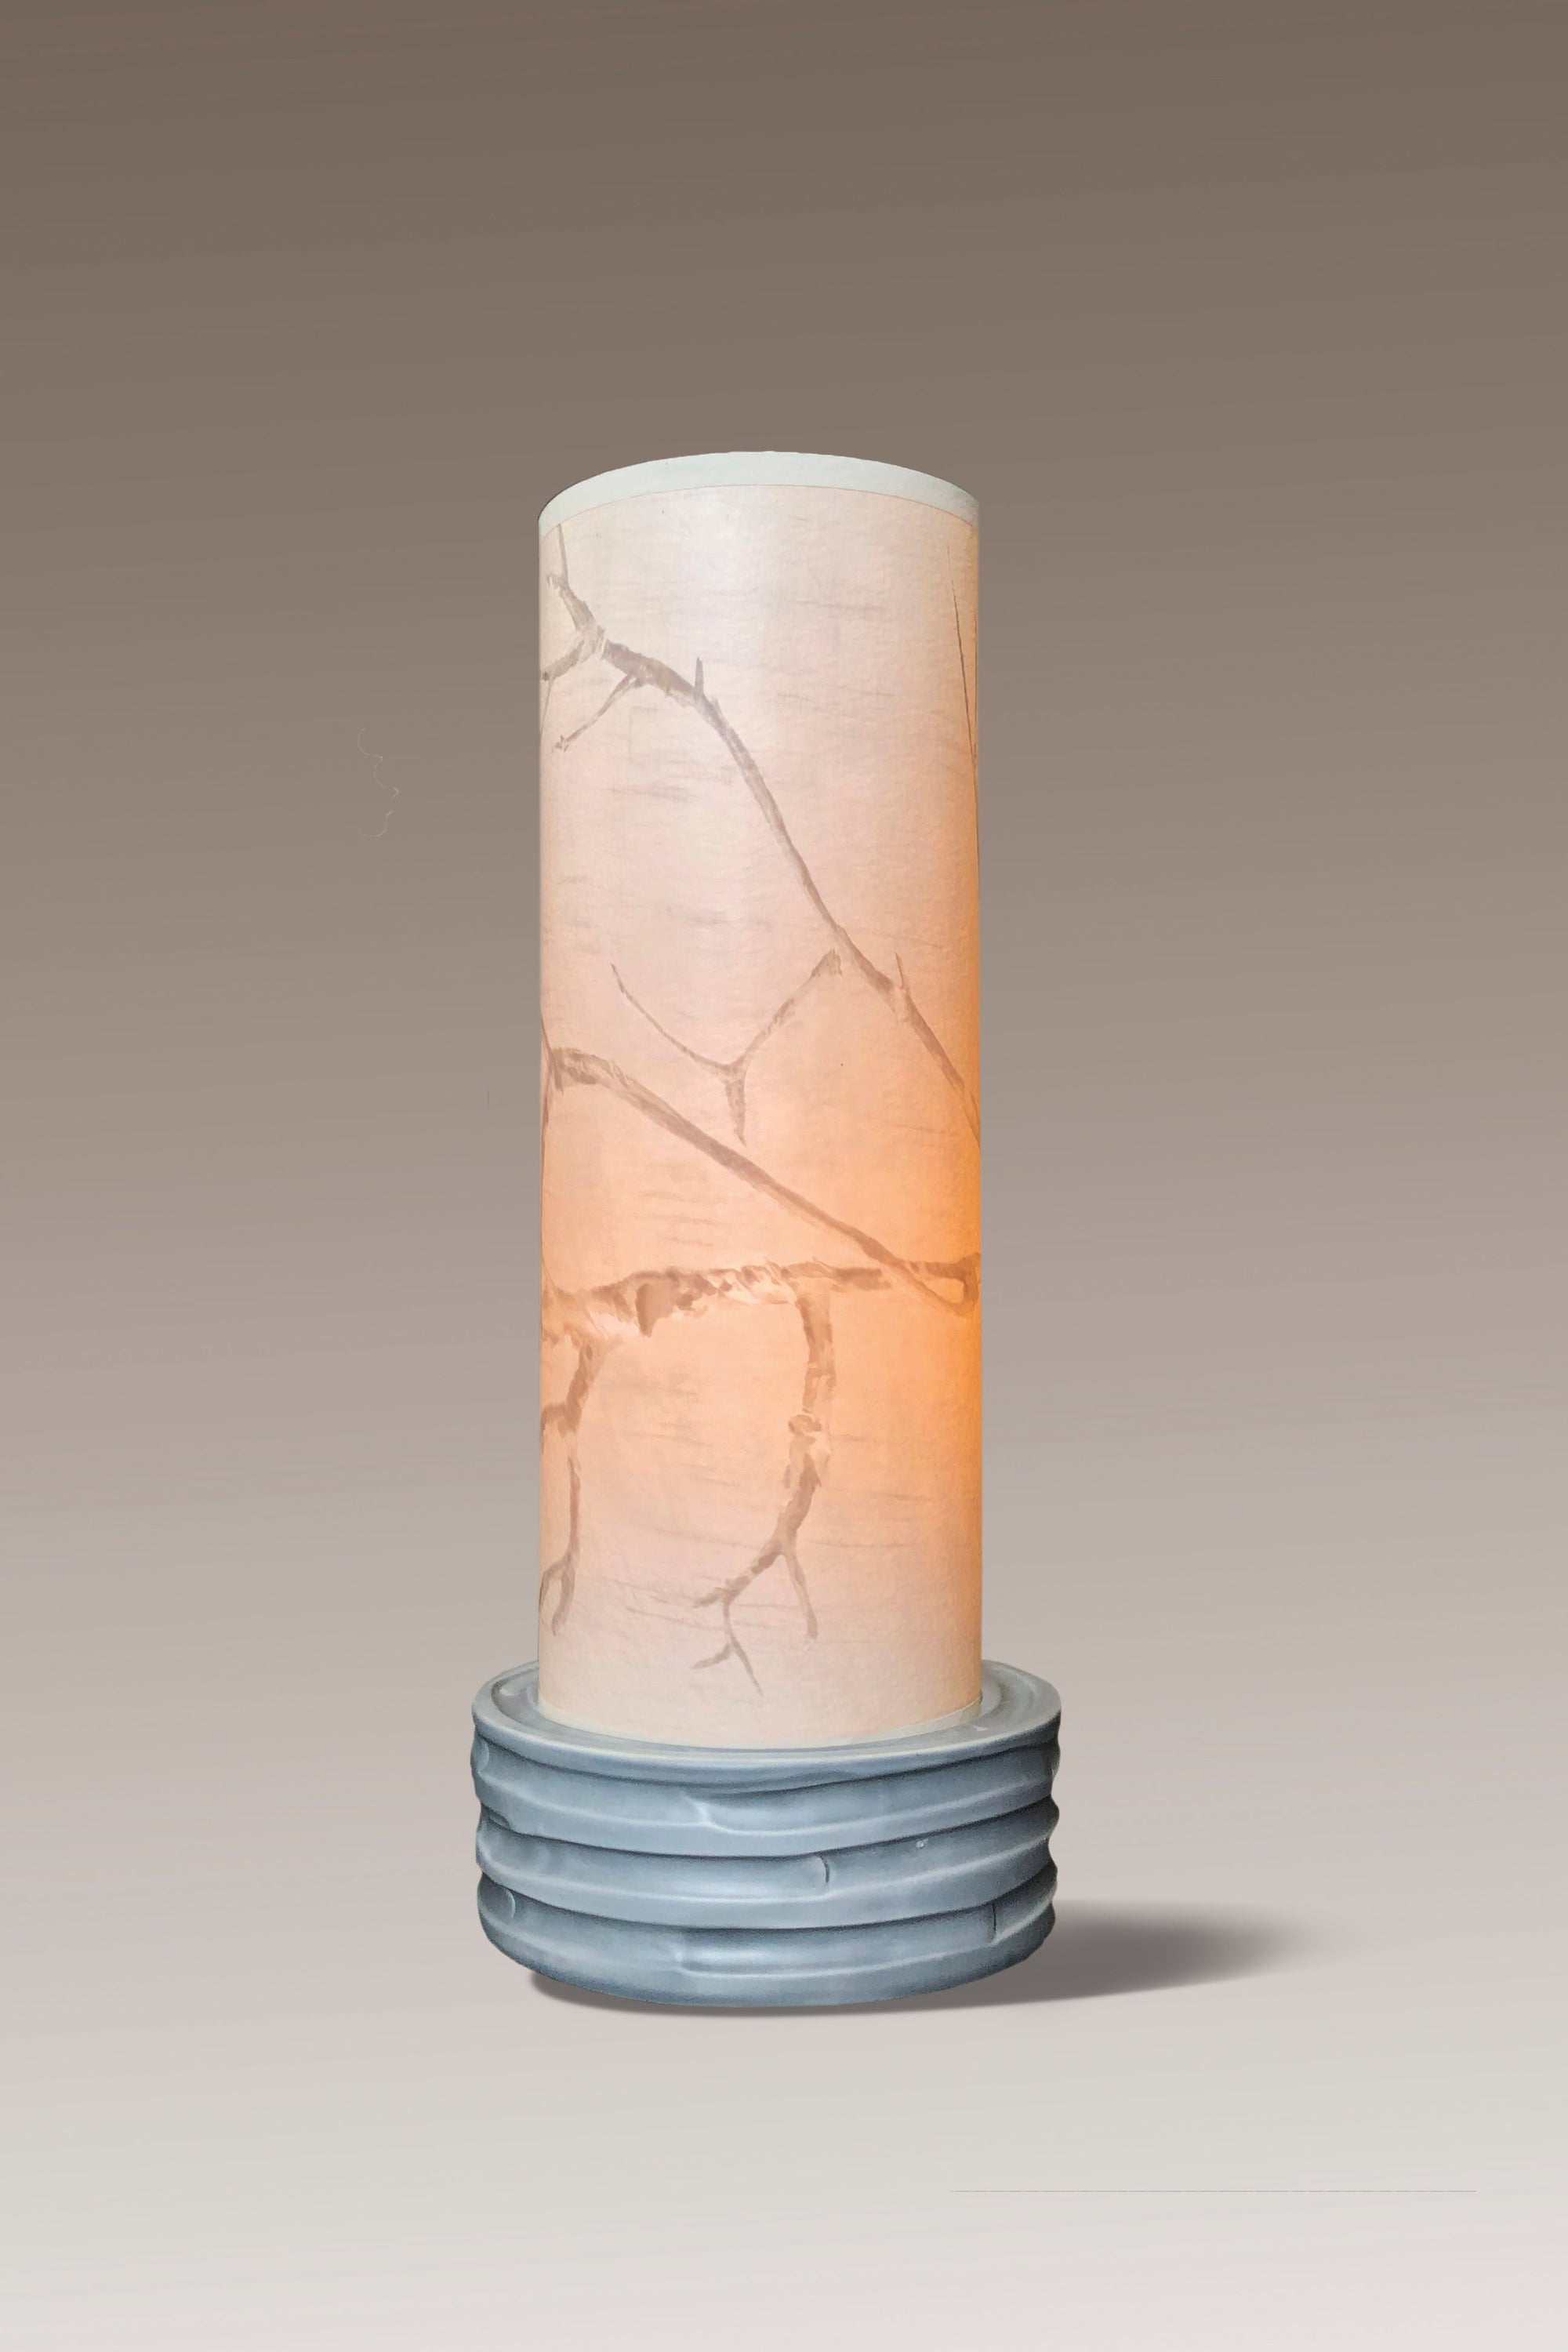 Janna Ugone & Co Luminaires Ceramic Luminaire Accent Lamp with Sweeping Branch Shade